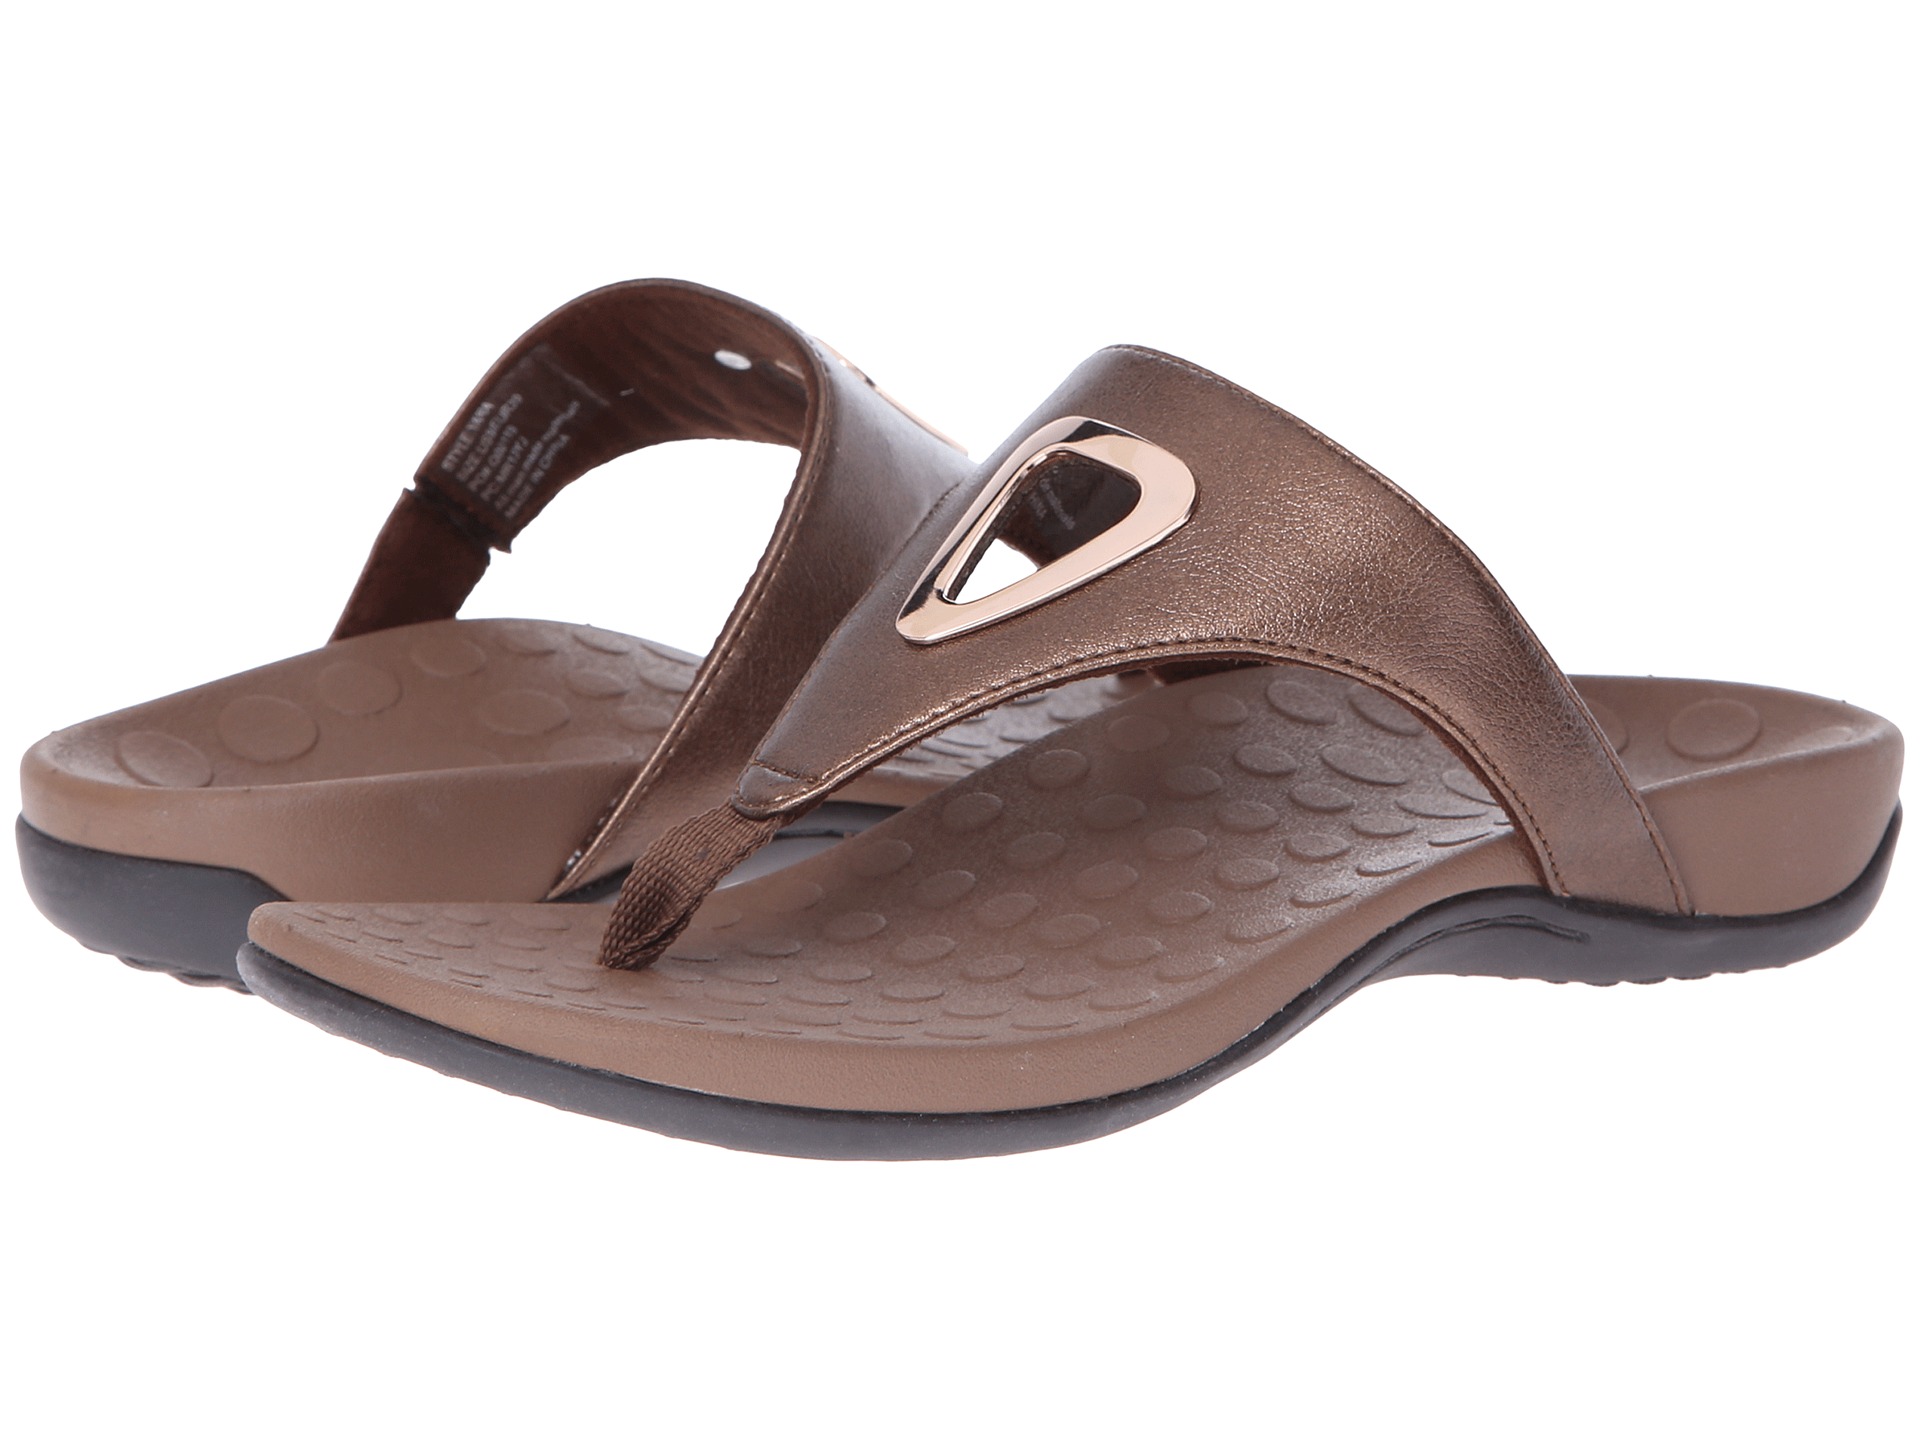 Vionic With Orthaheel Technology Yara Bronze | Shipped Free at Zappos